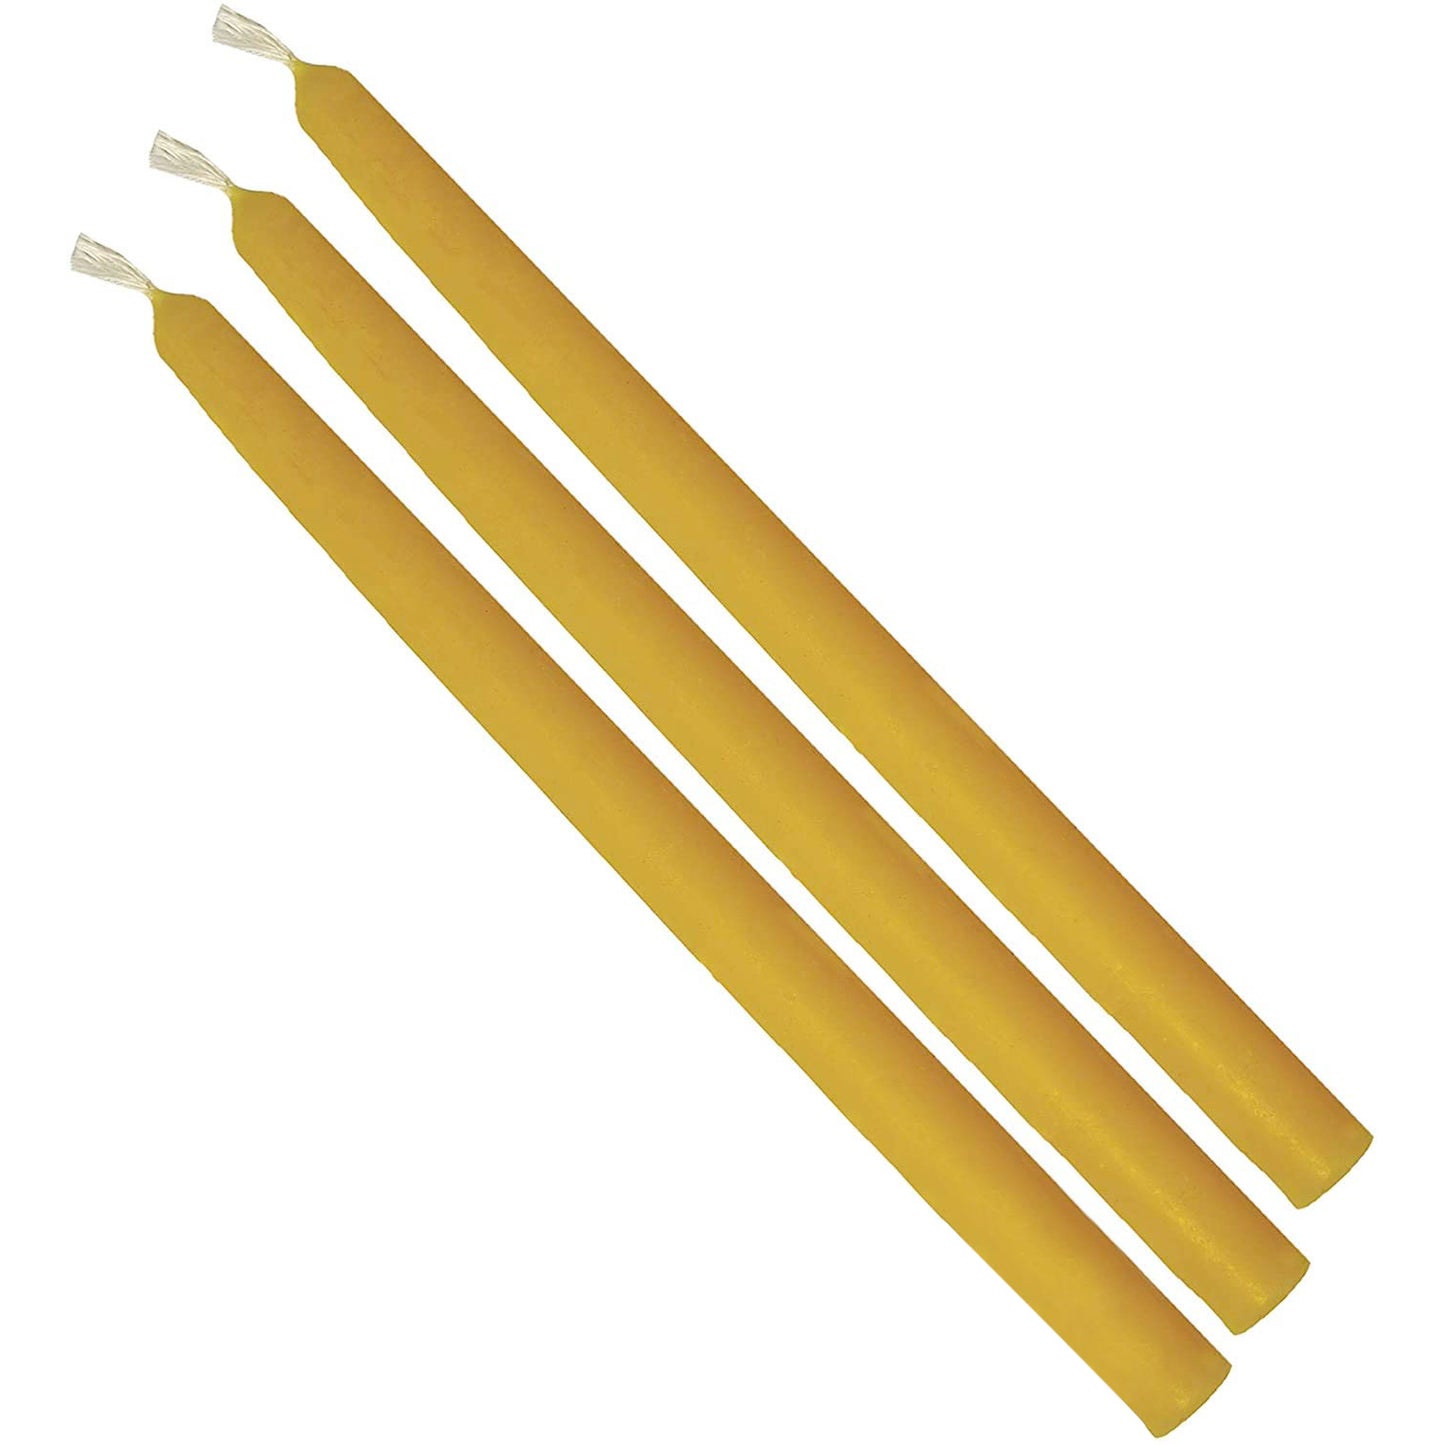 Handmade Beeswax Taper Candles